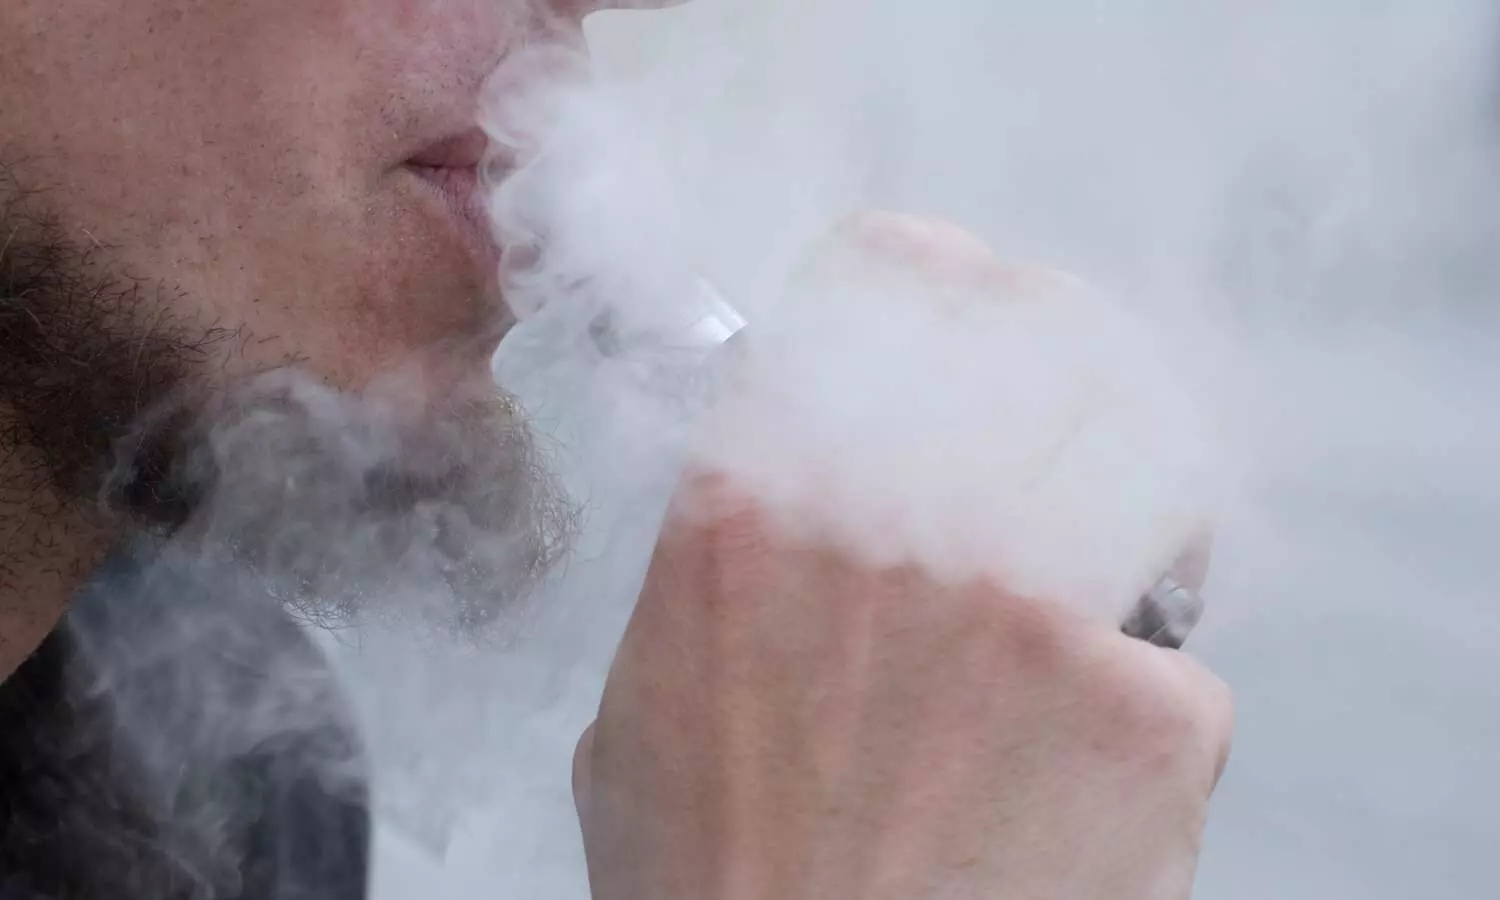 Smoking tobacco and vaping may put healthy young people at risk of severe COVID illness